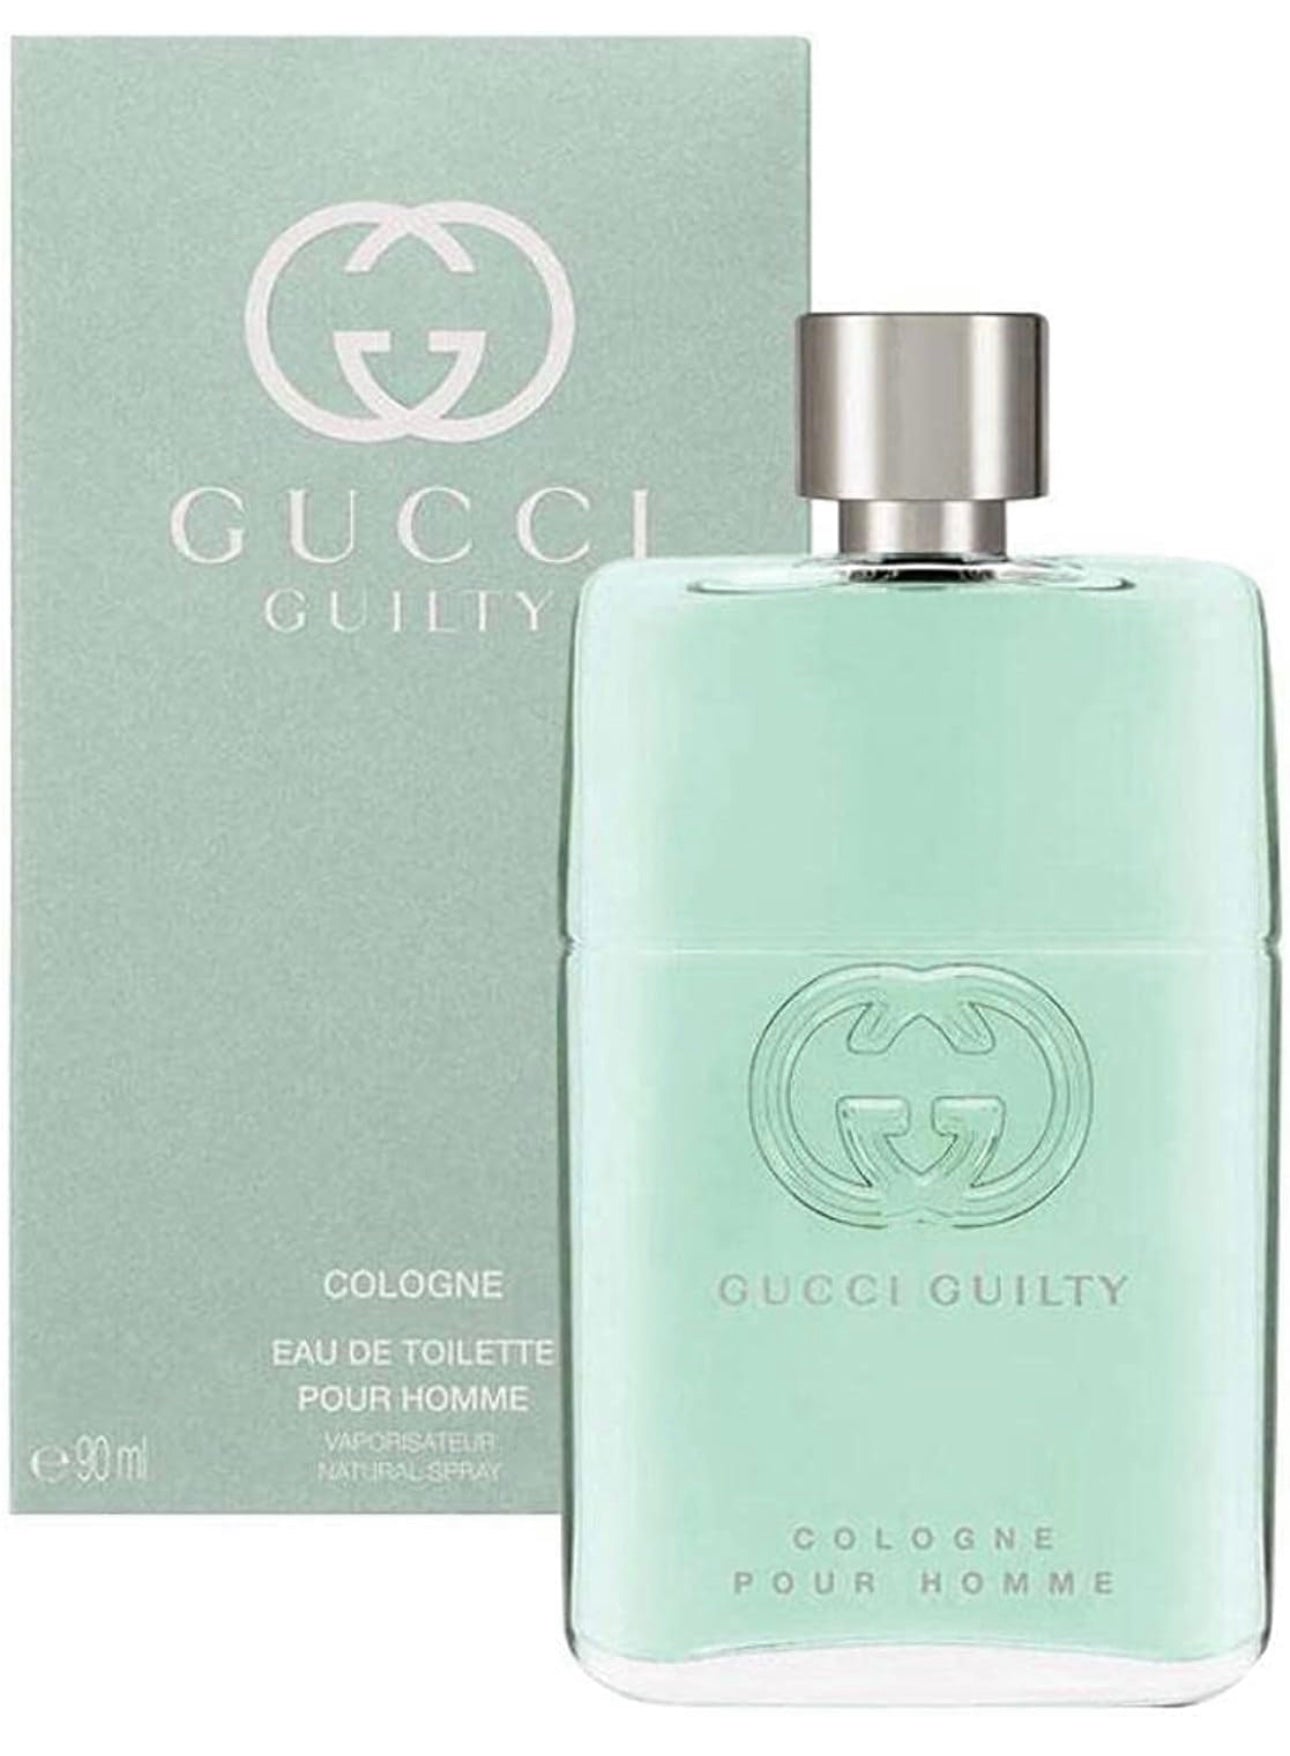 Gucci-Guilty Cologne EdT